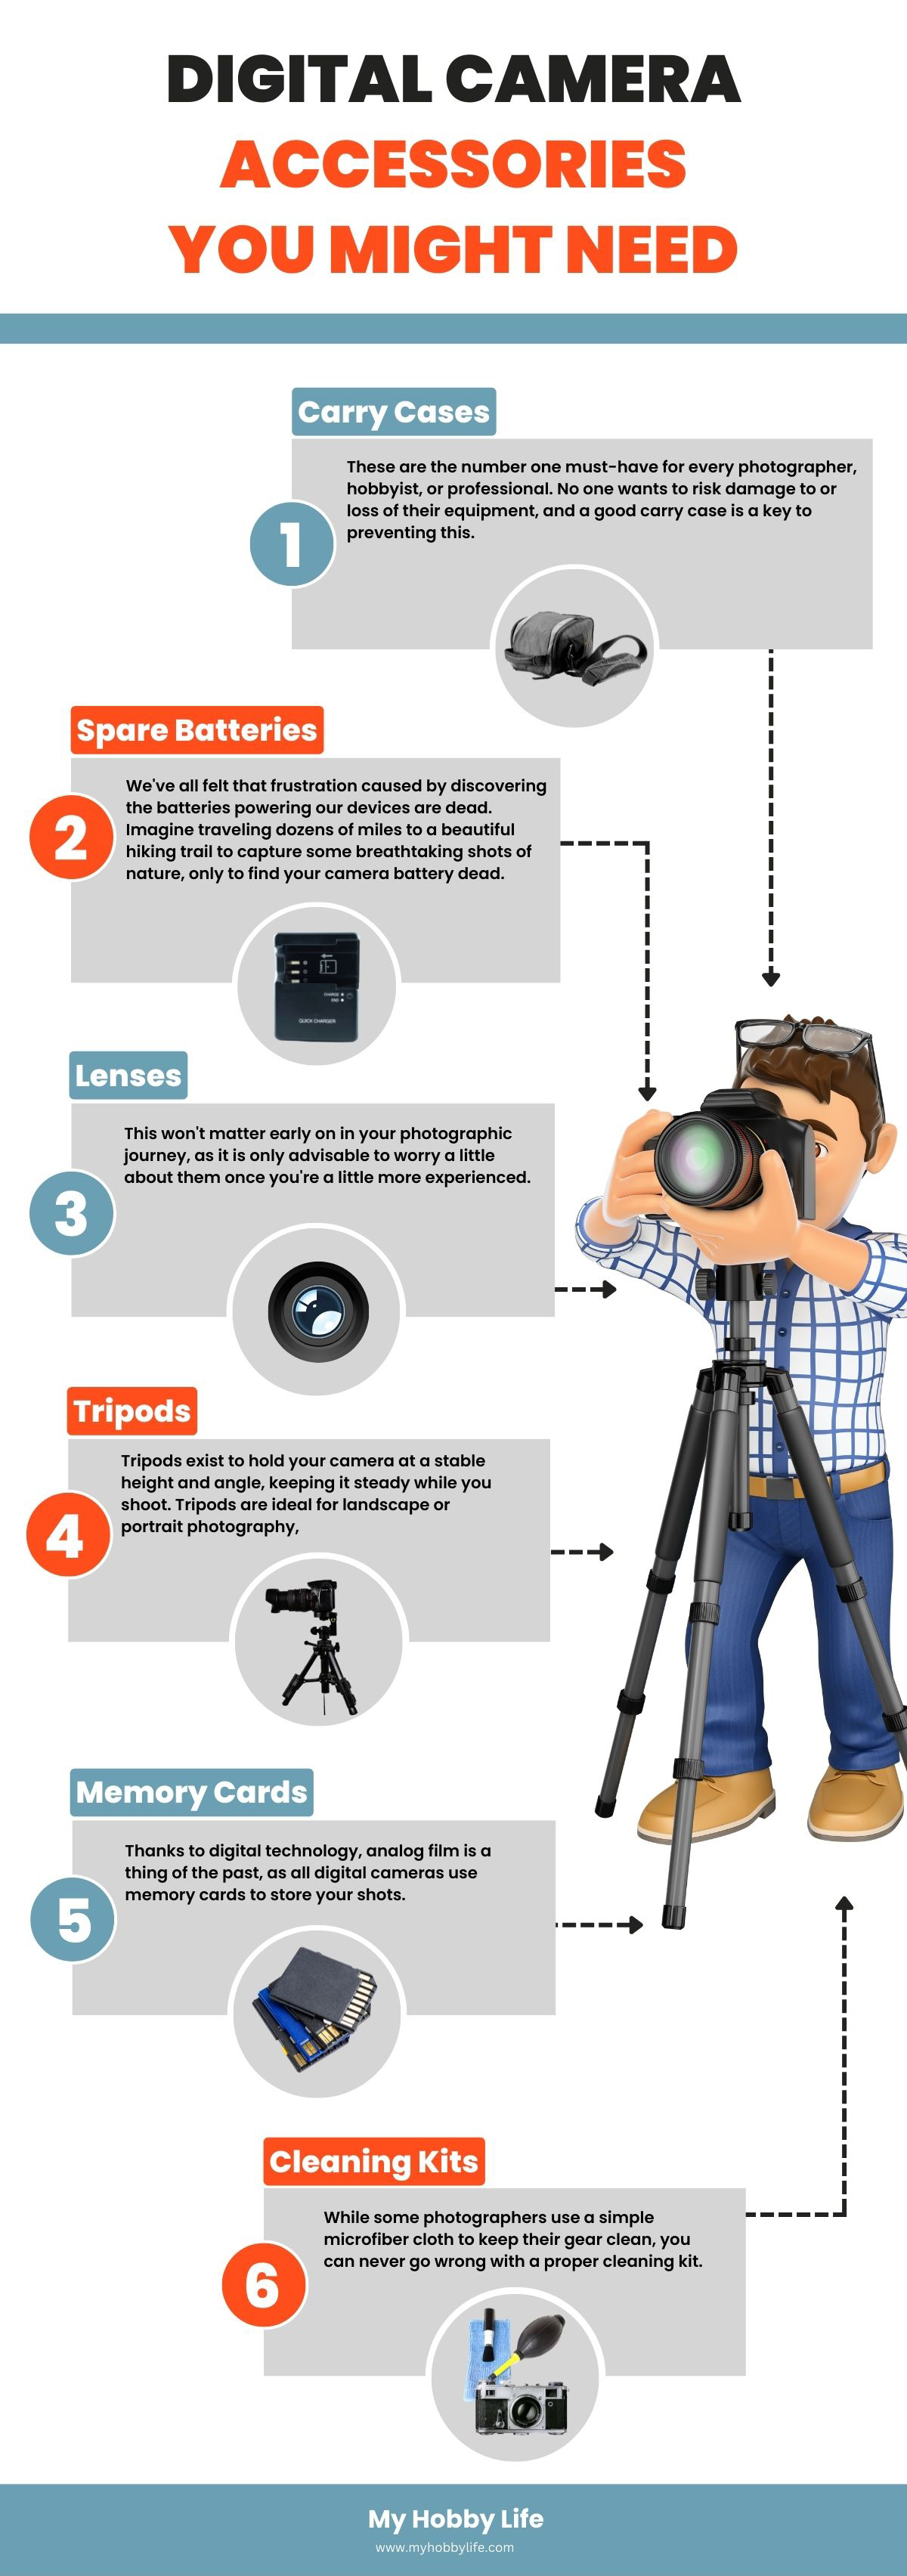 Digital camera accessories you might need